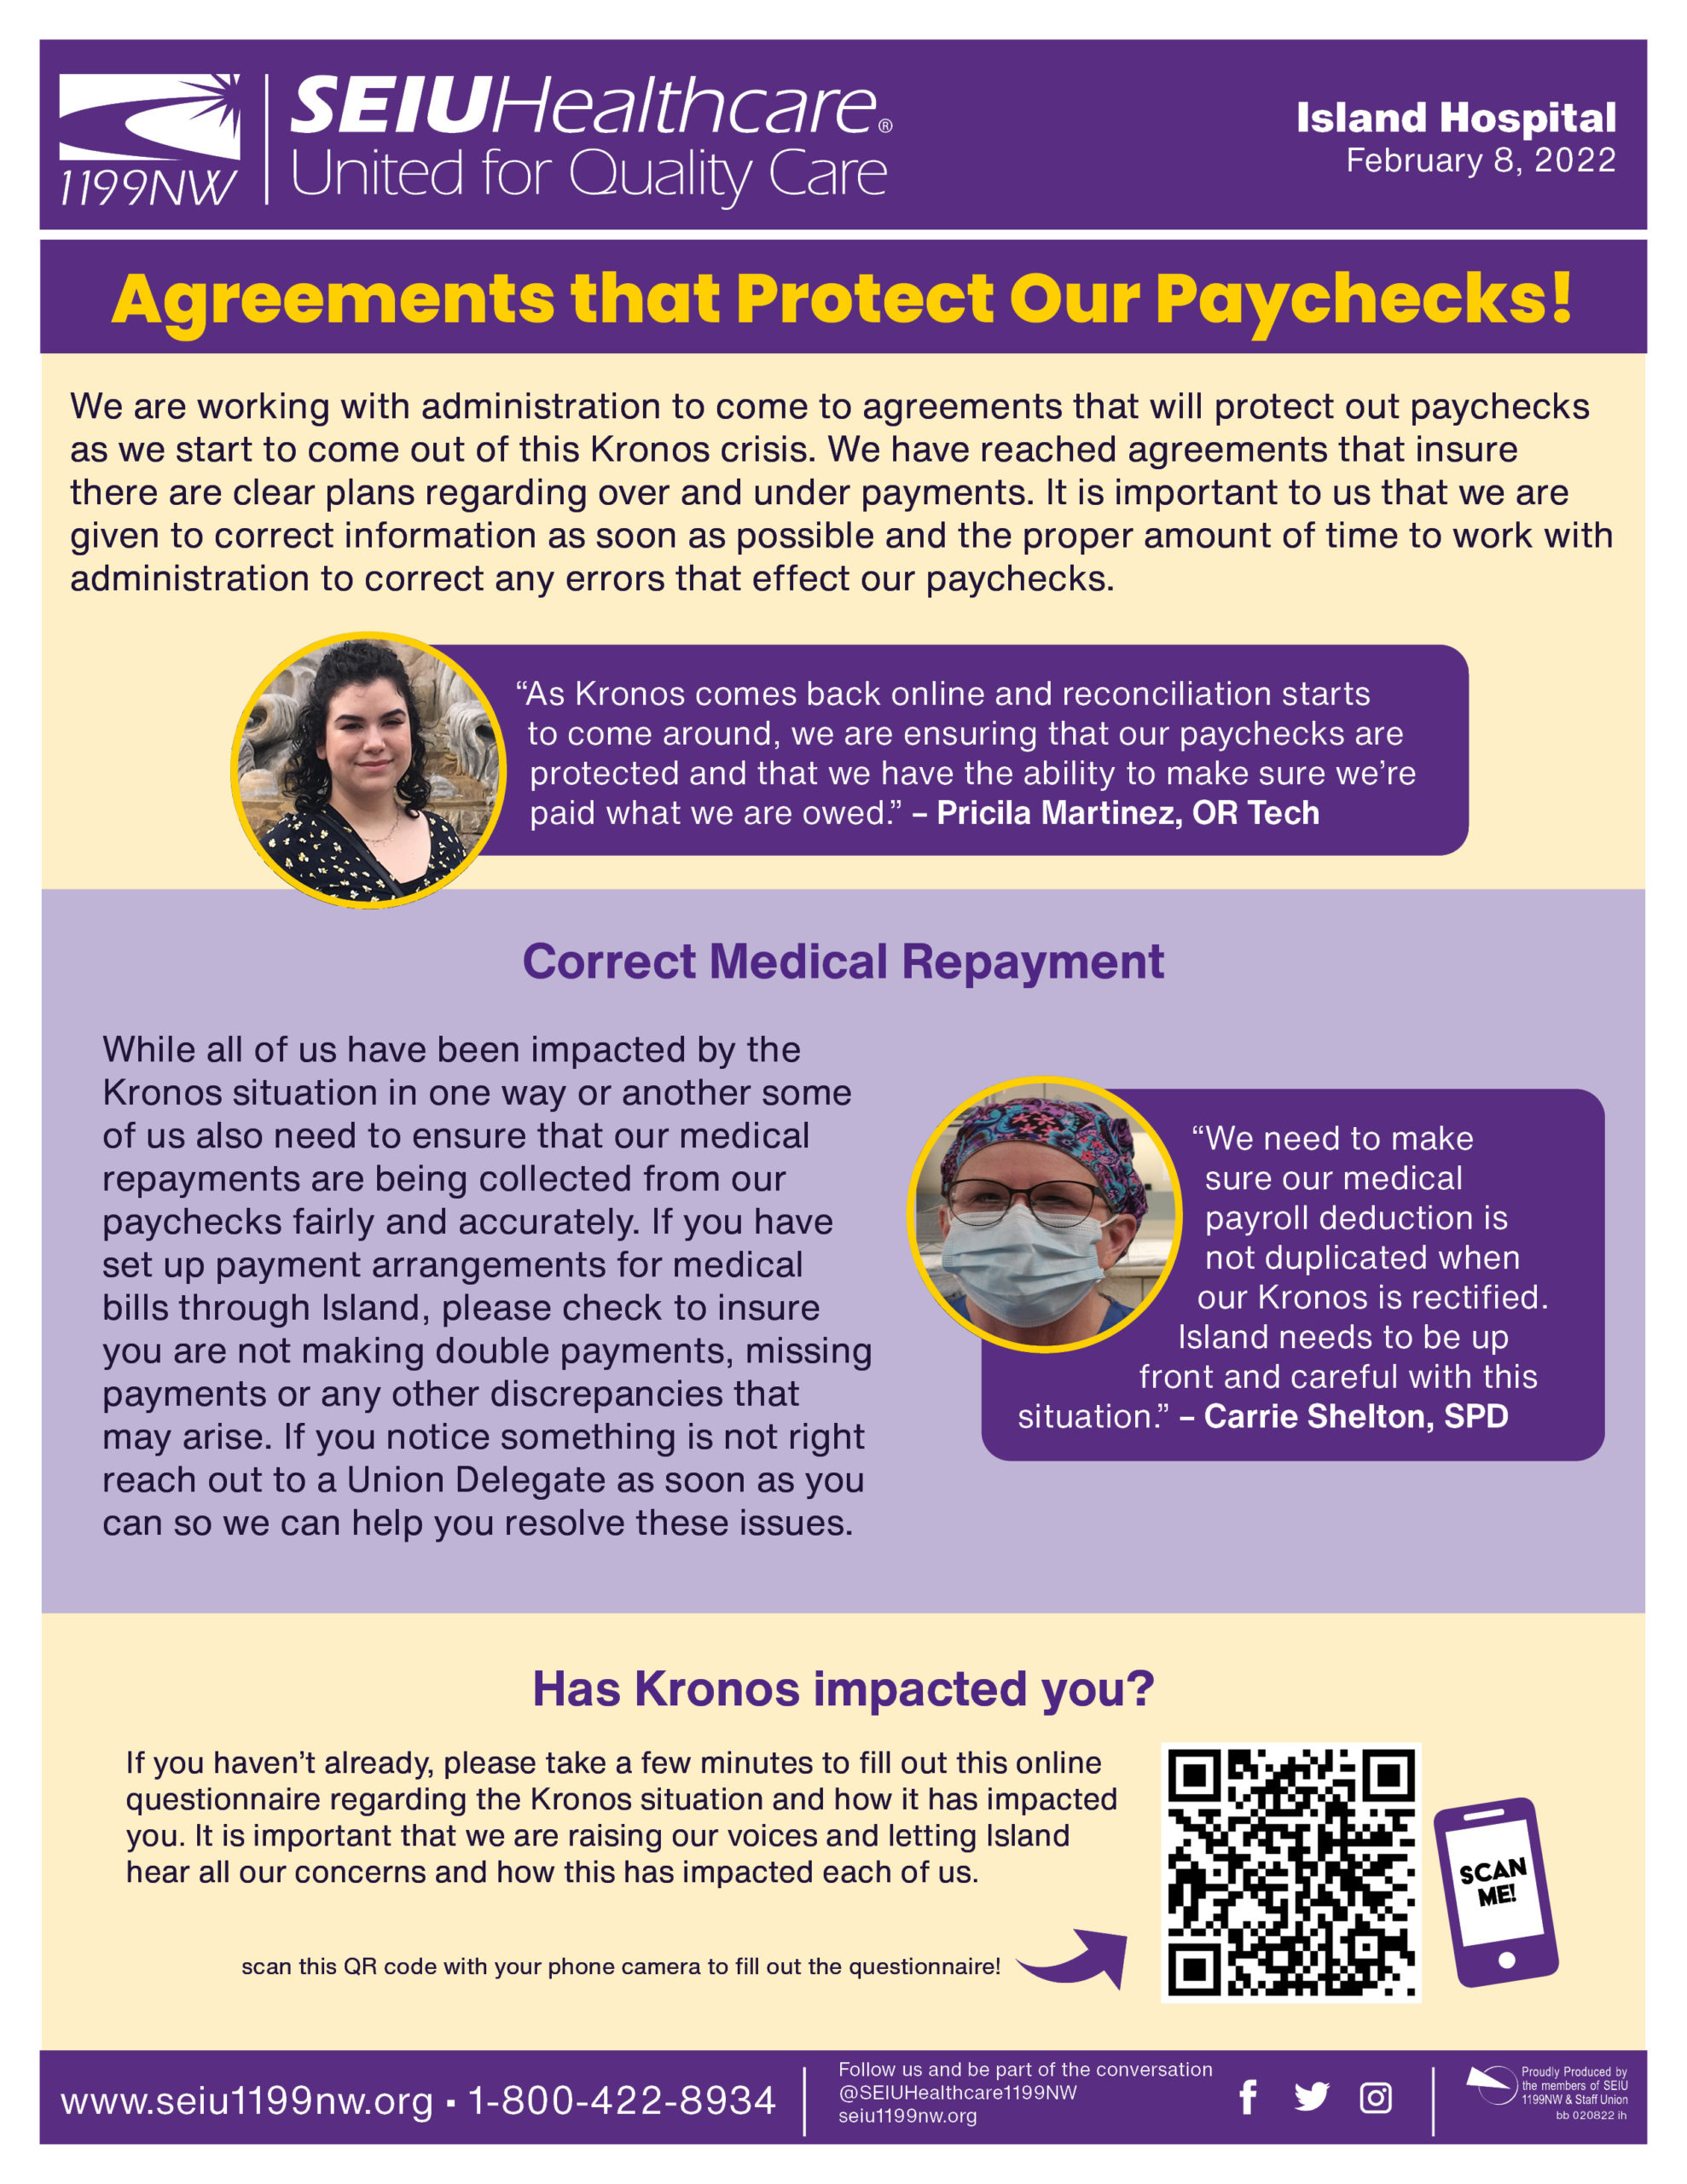 Agreements that Protect Our Paychecks